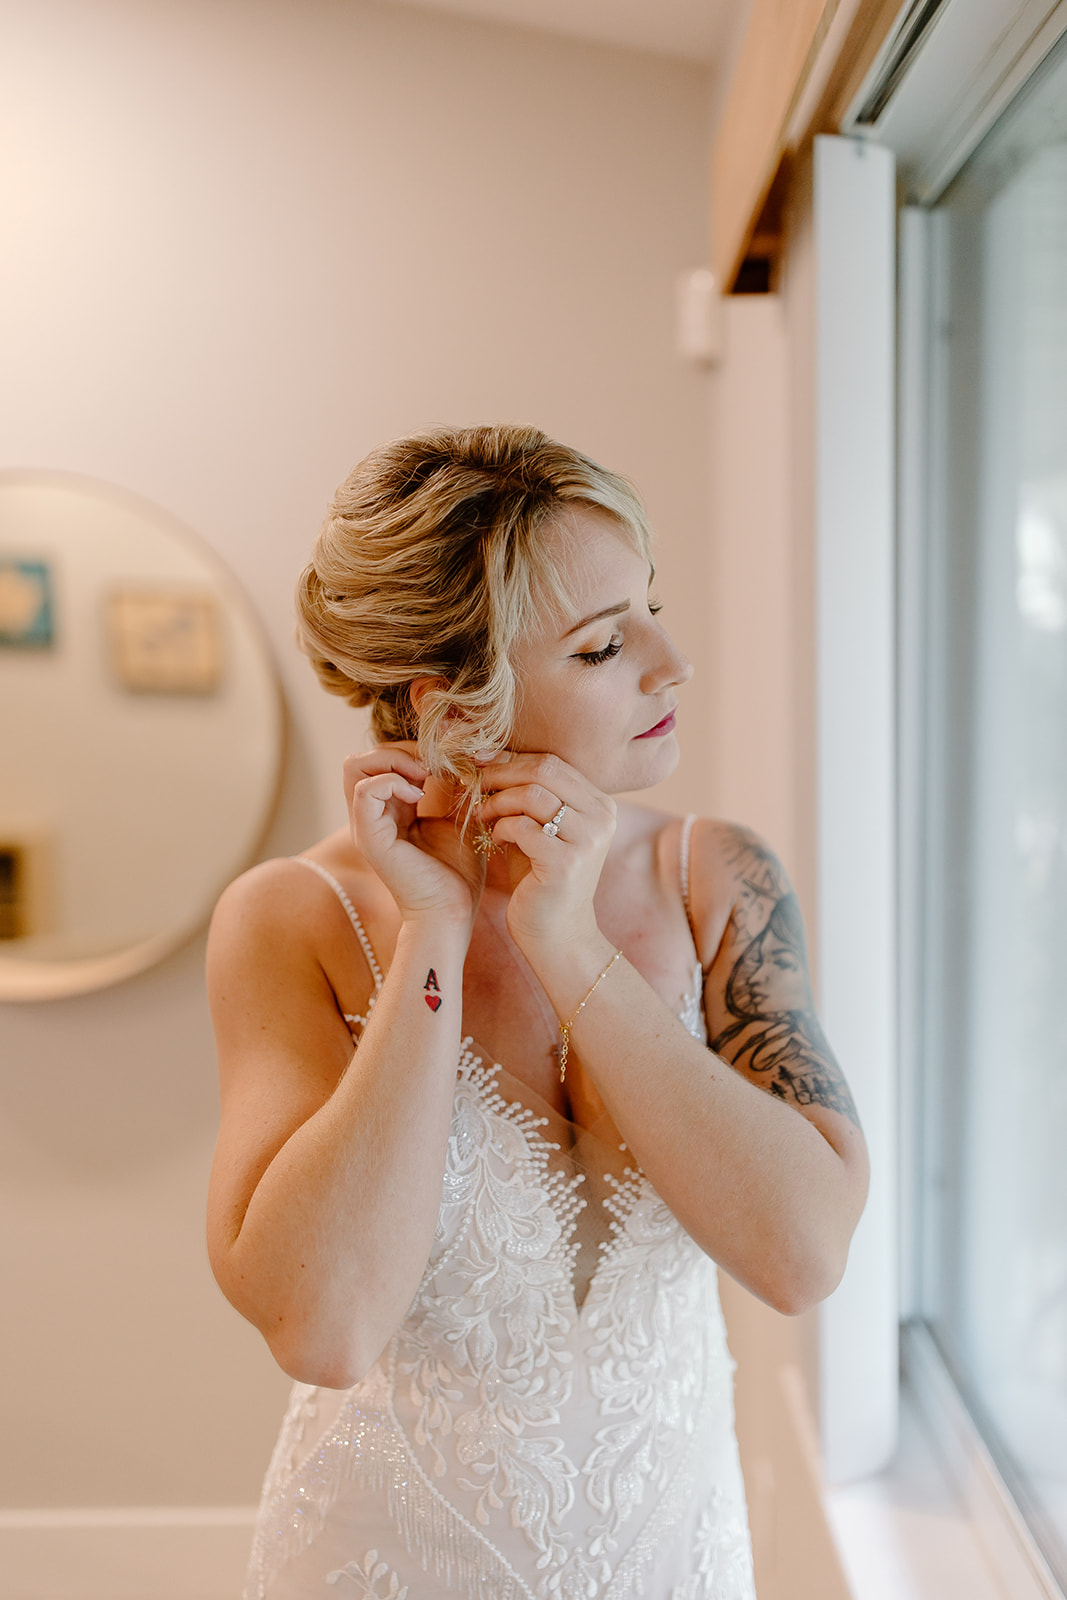 Bride puts her earrings in while standing in front of a window